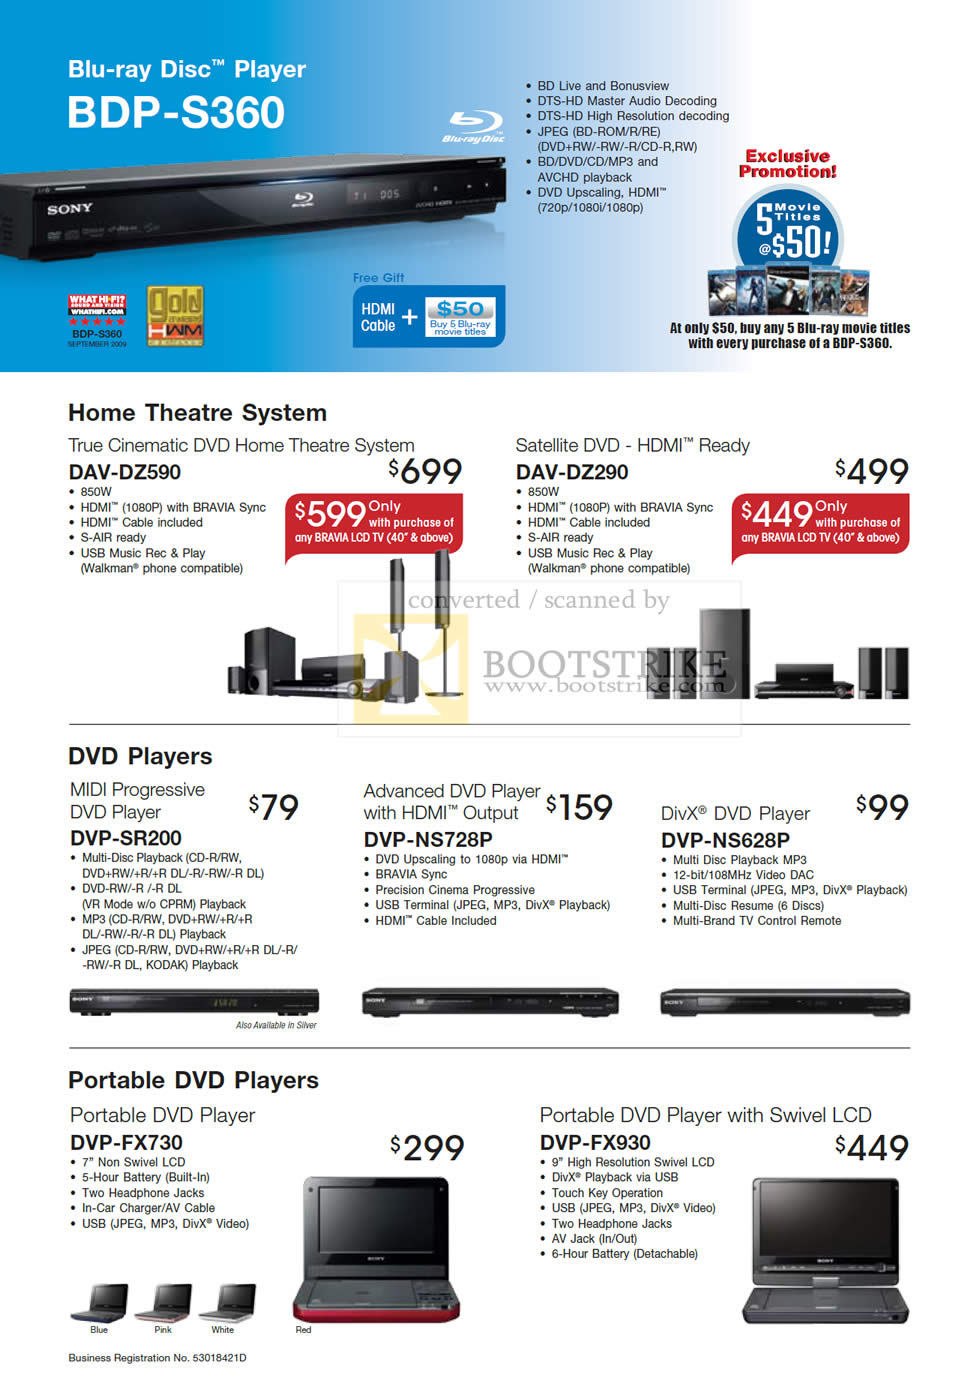 Sitex 2009 price list image brochure of Sony Blu Ray BDP S360 Home Theatre DAV DVD Portable DVP Players